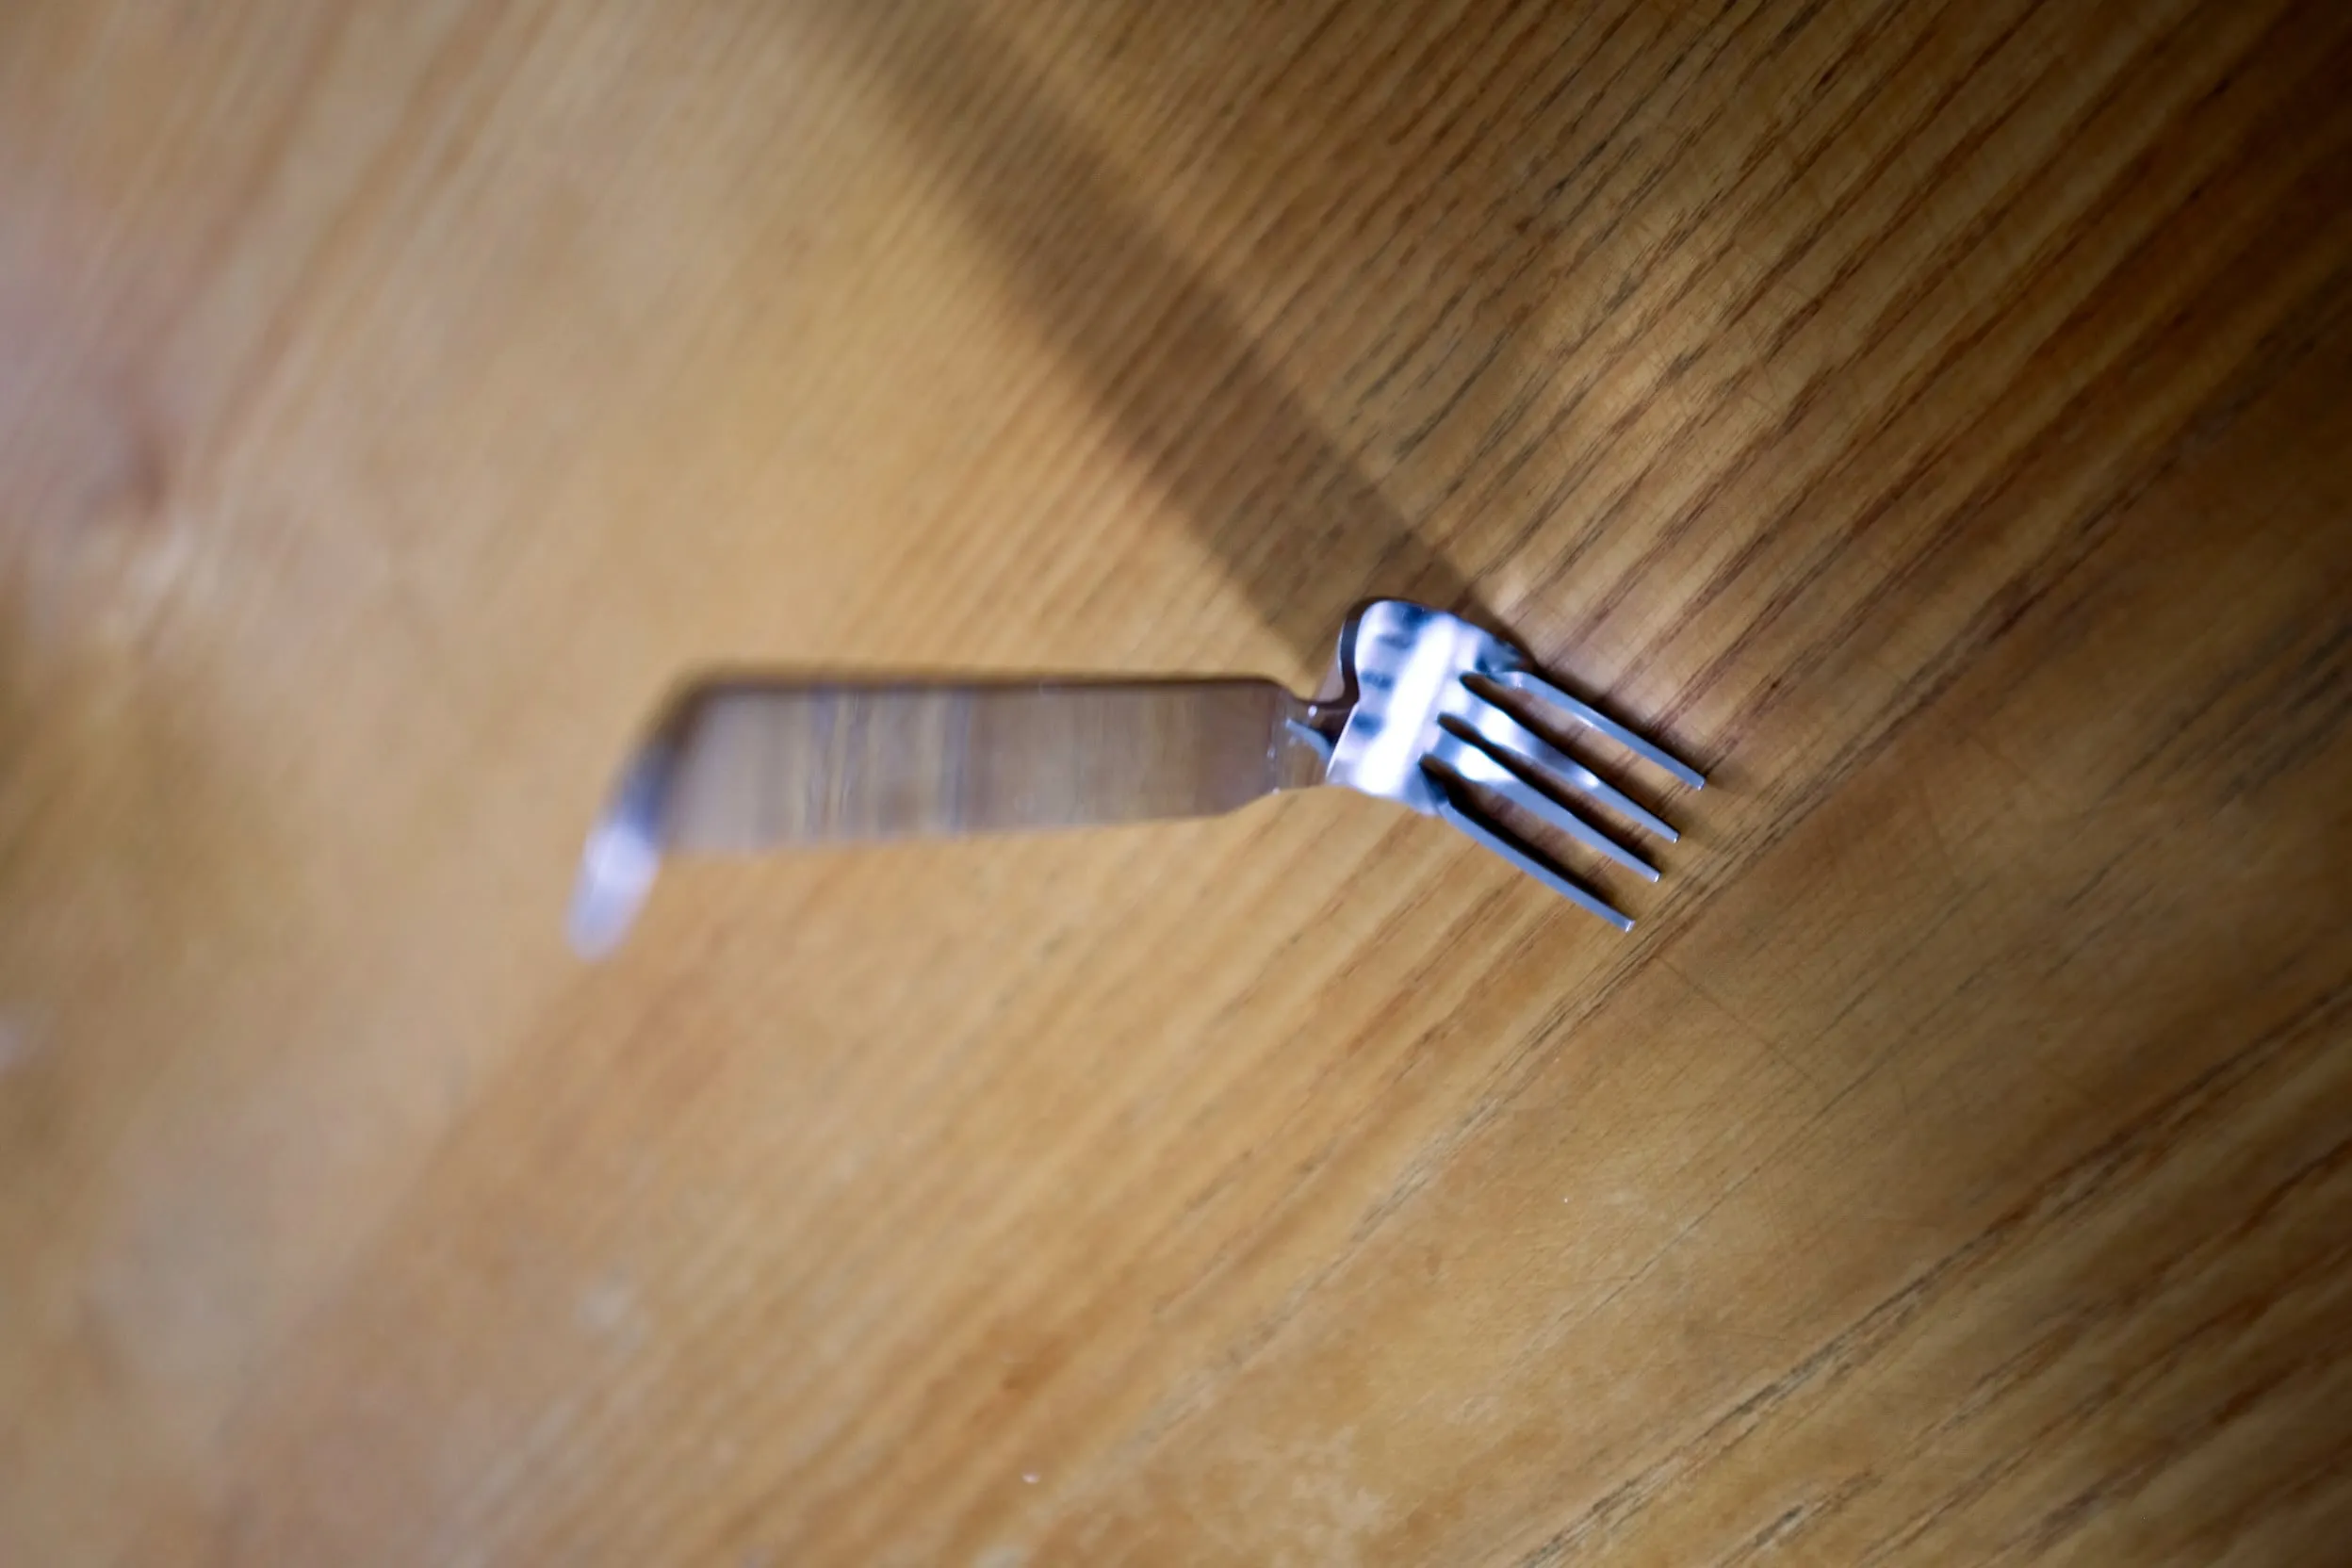 A bent fork made for mashing food